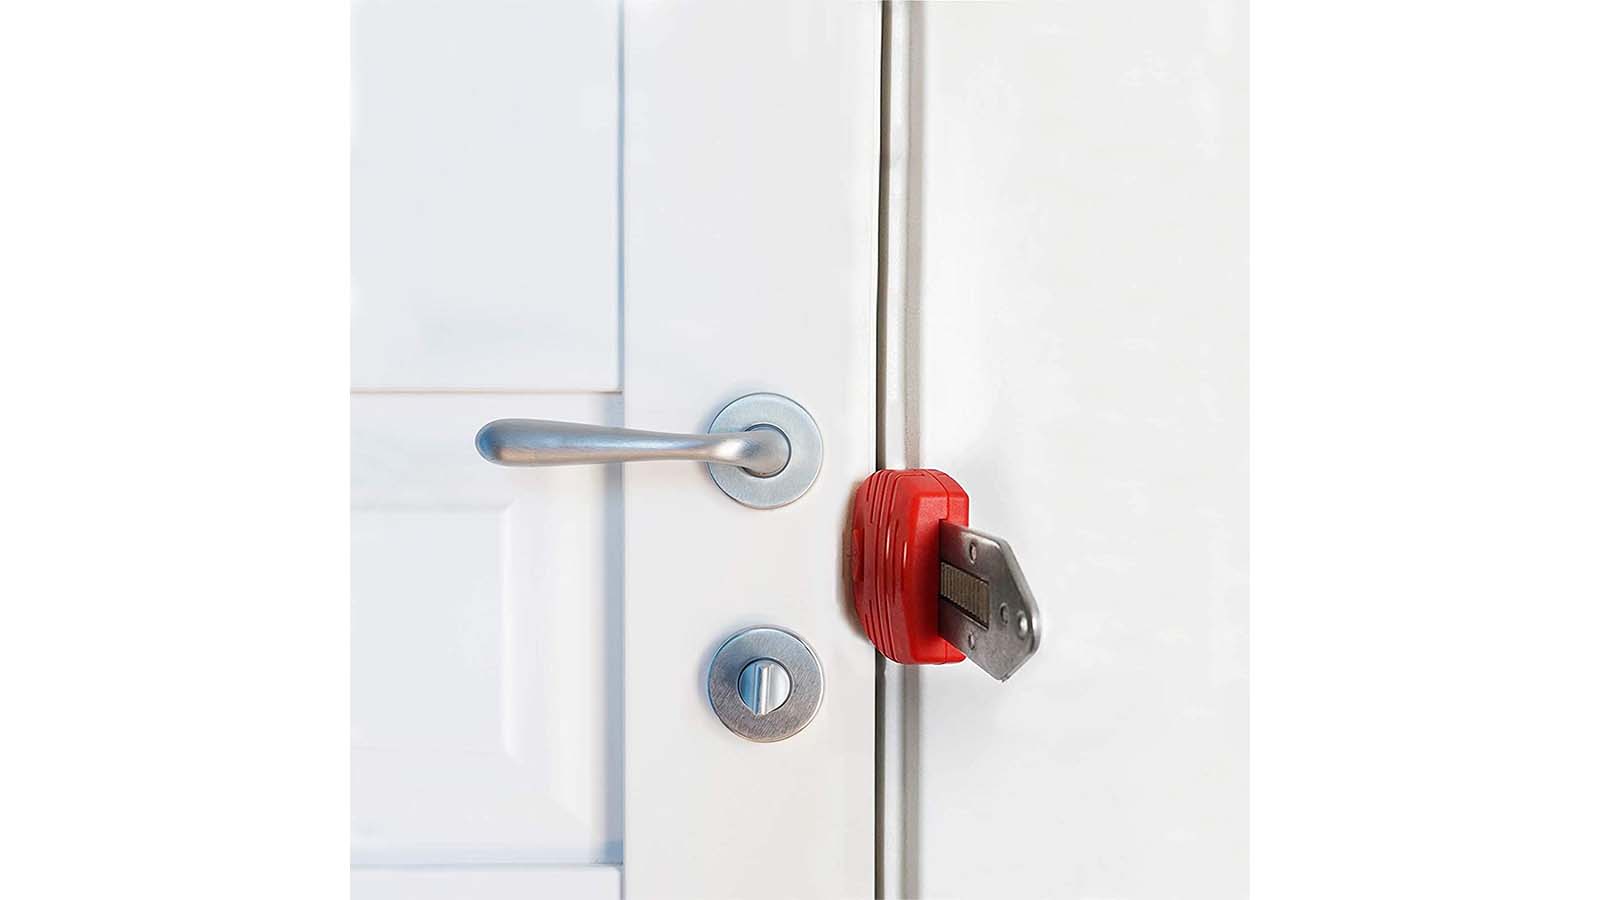 Portable Travel Door Lock for Hotel Room Security - Locks from Inside for  Travelers, Bedrooms & Apartments